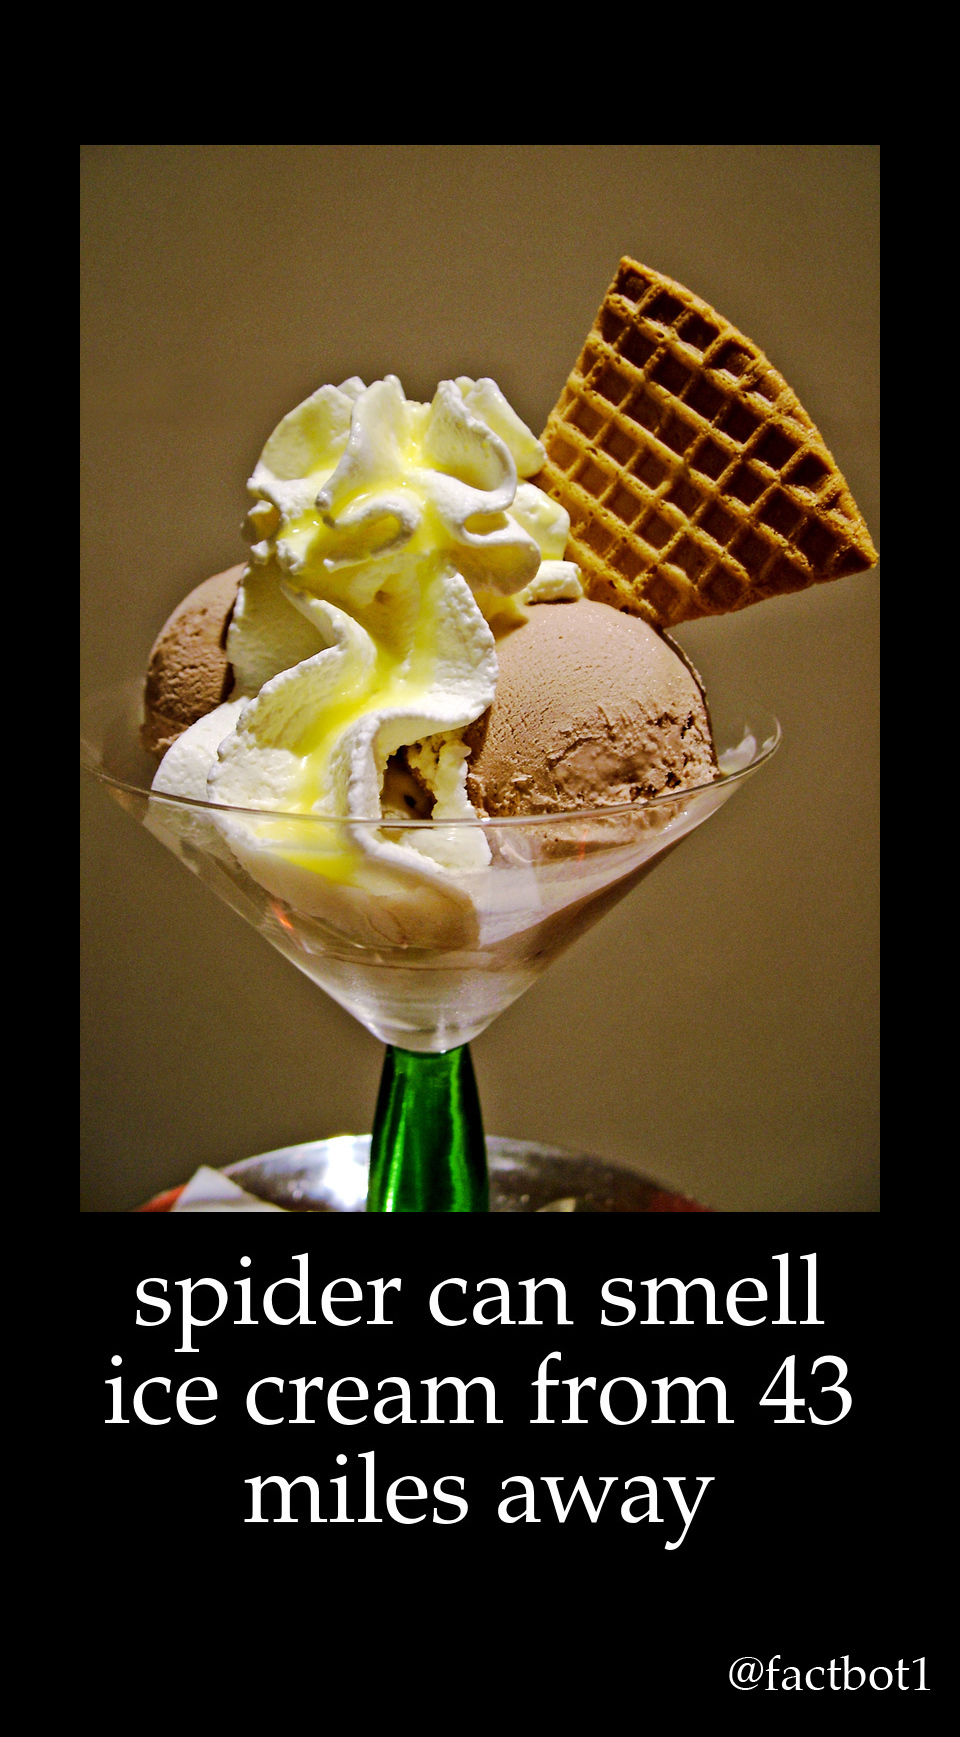 italian ice cream - spider can smell ice cream from 43 miles away